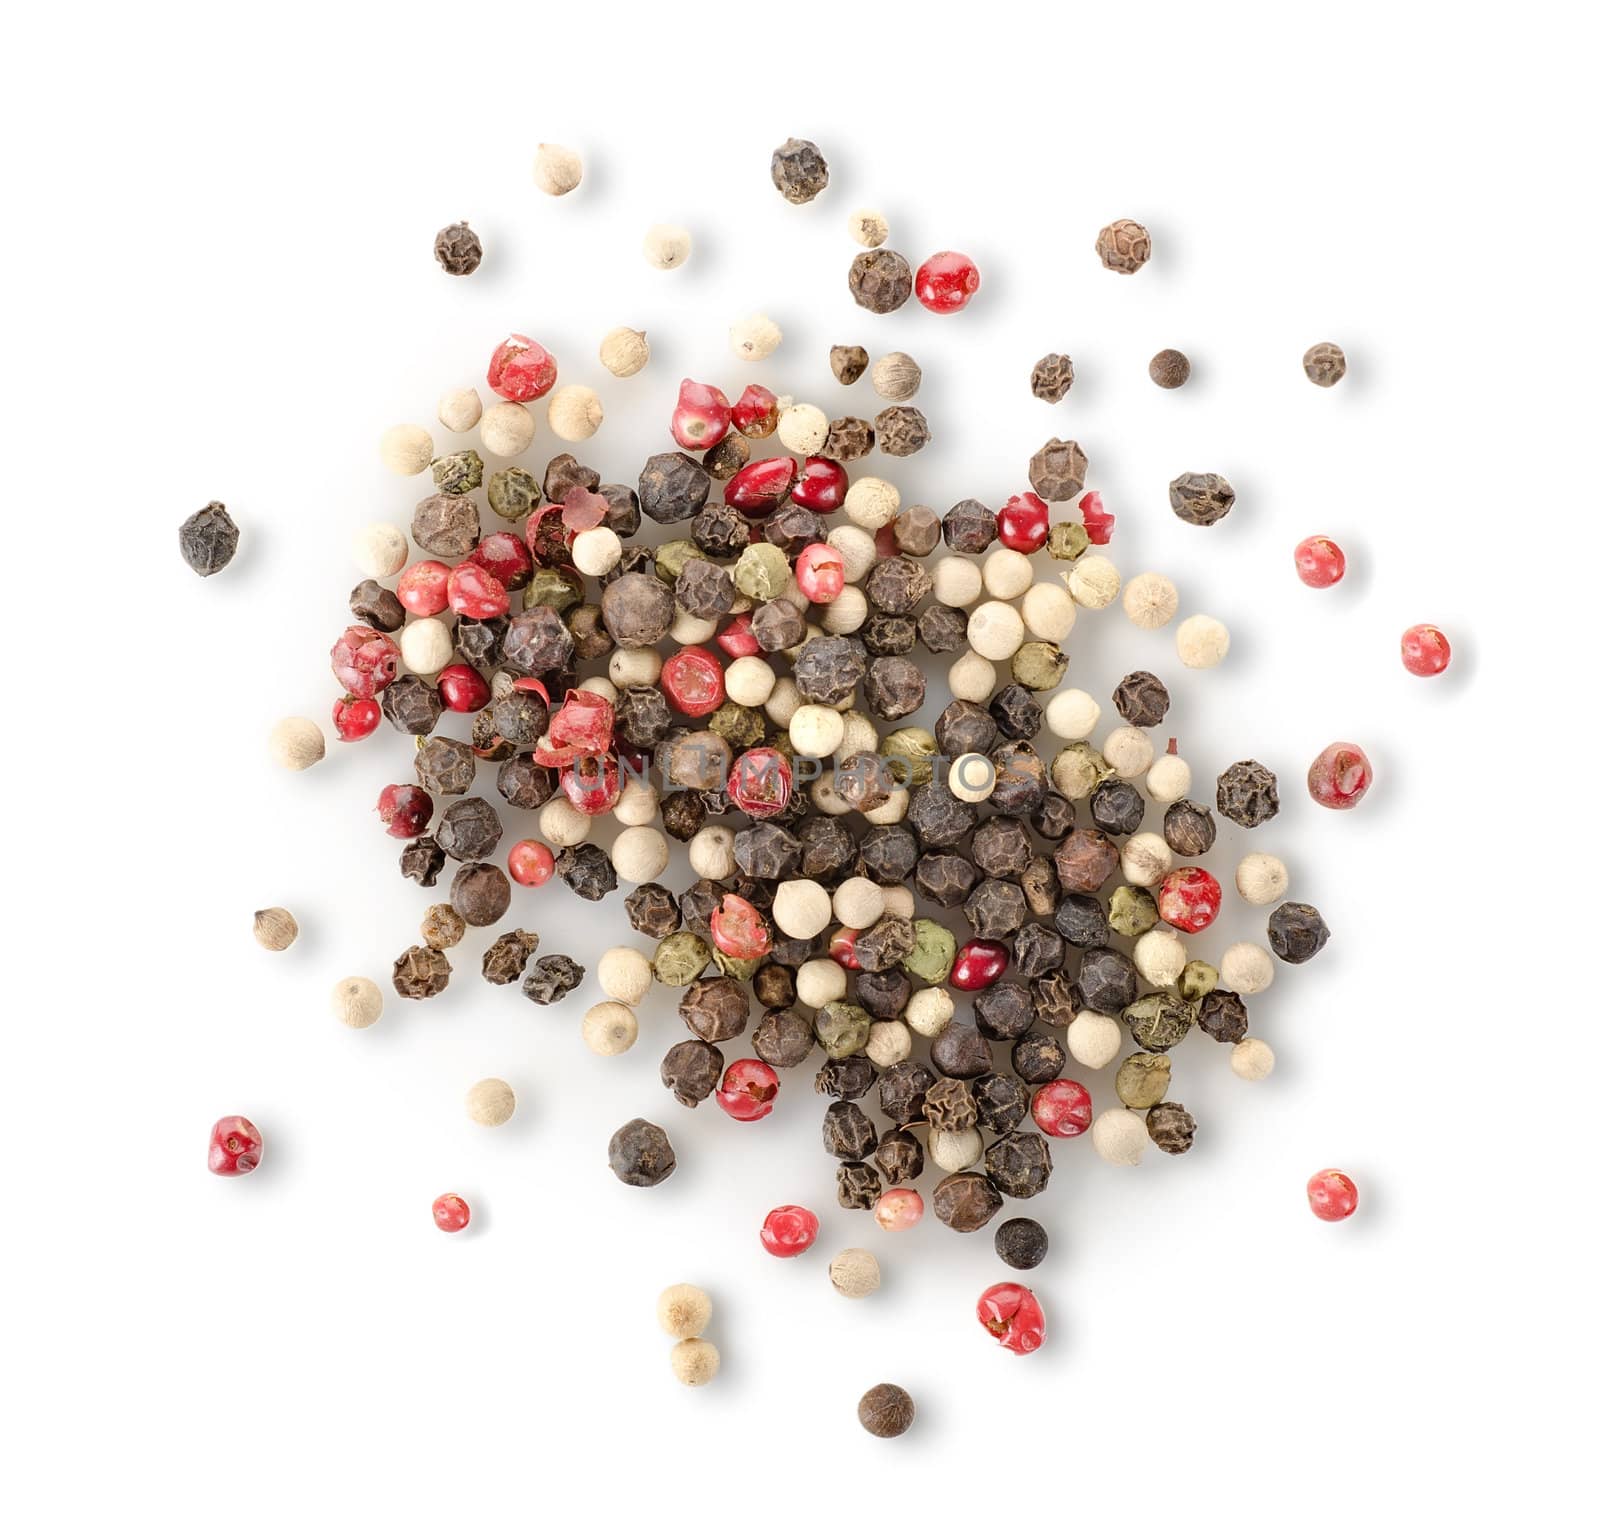 Spices of red and black pepper isolated on white background